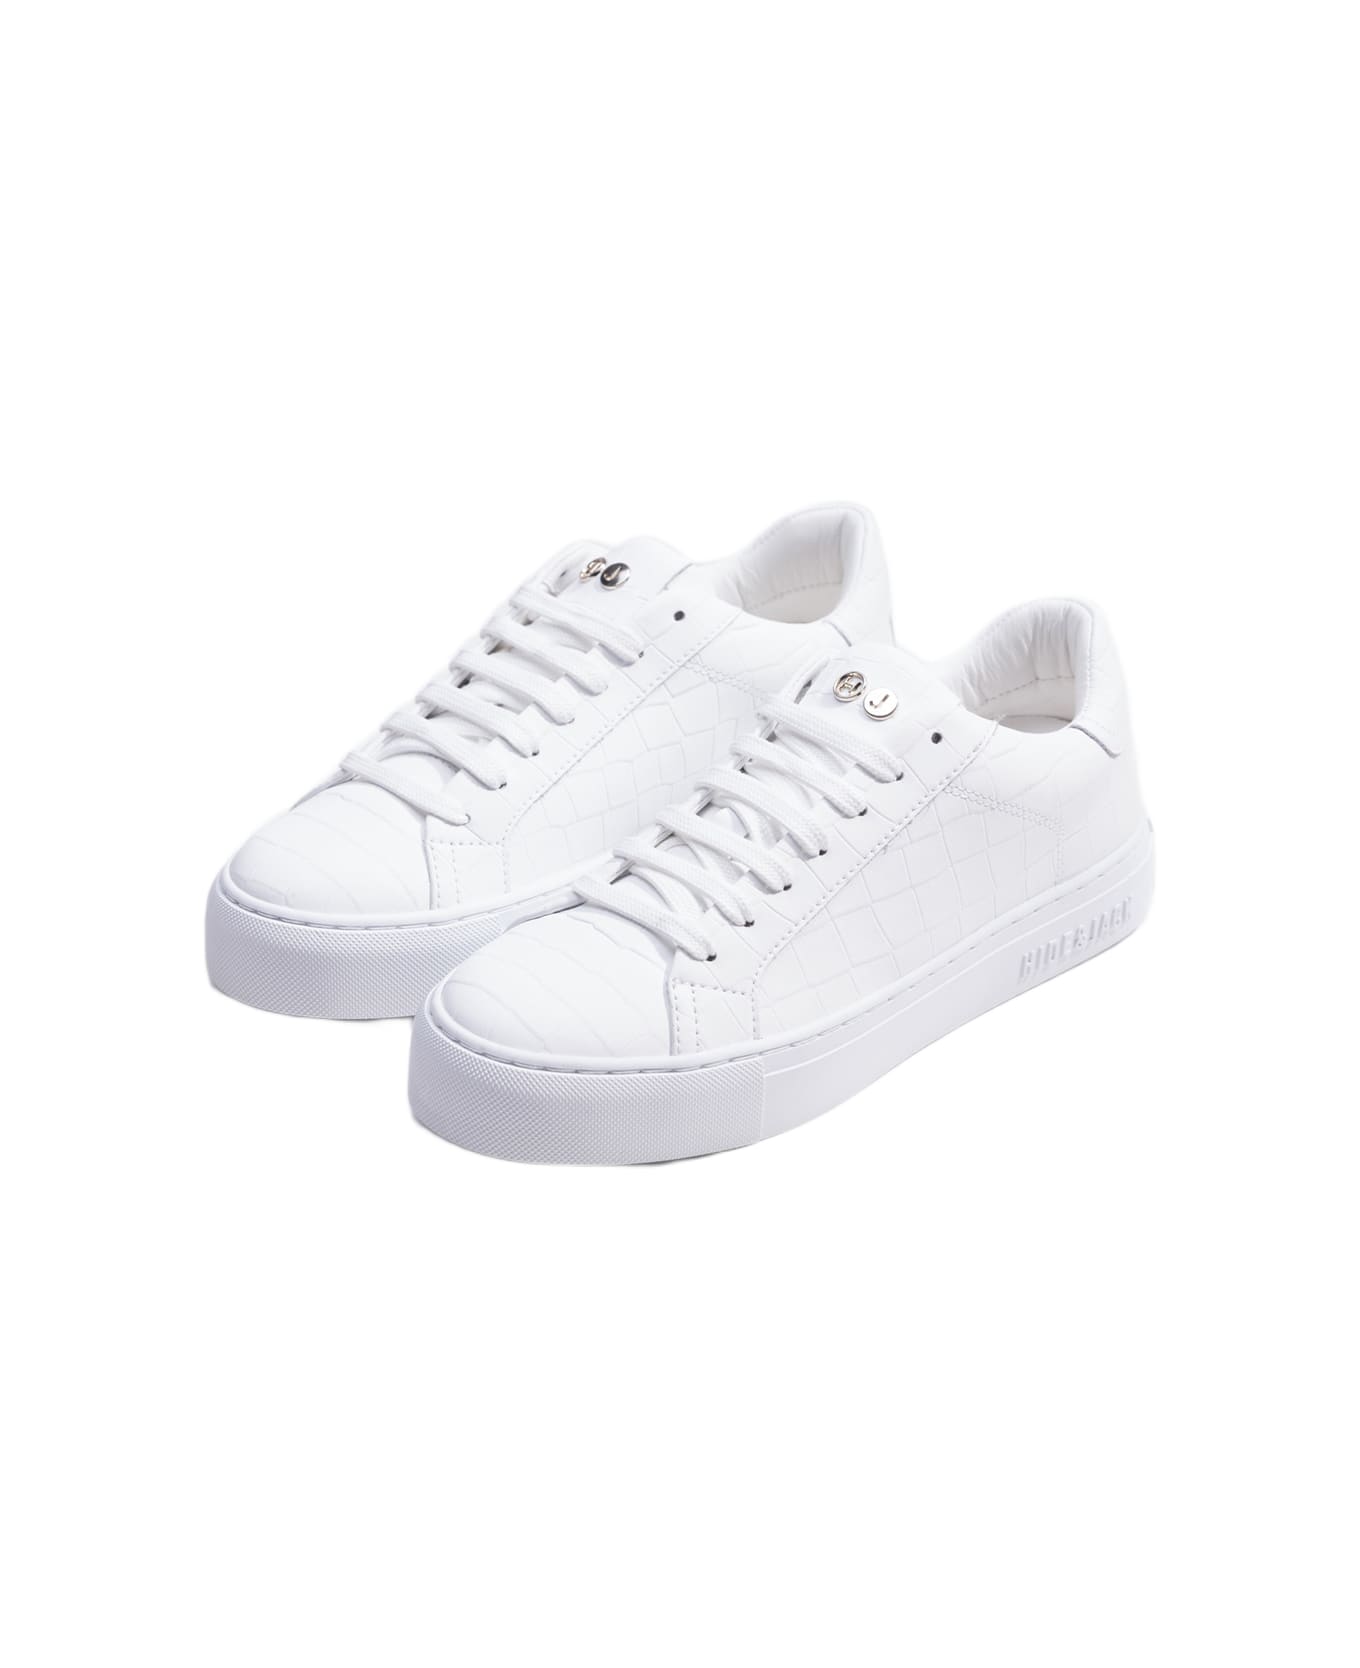 Hide&Jack Low Top Sneaker - Essence Tuscany White